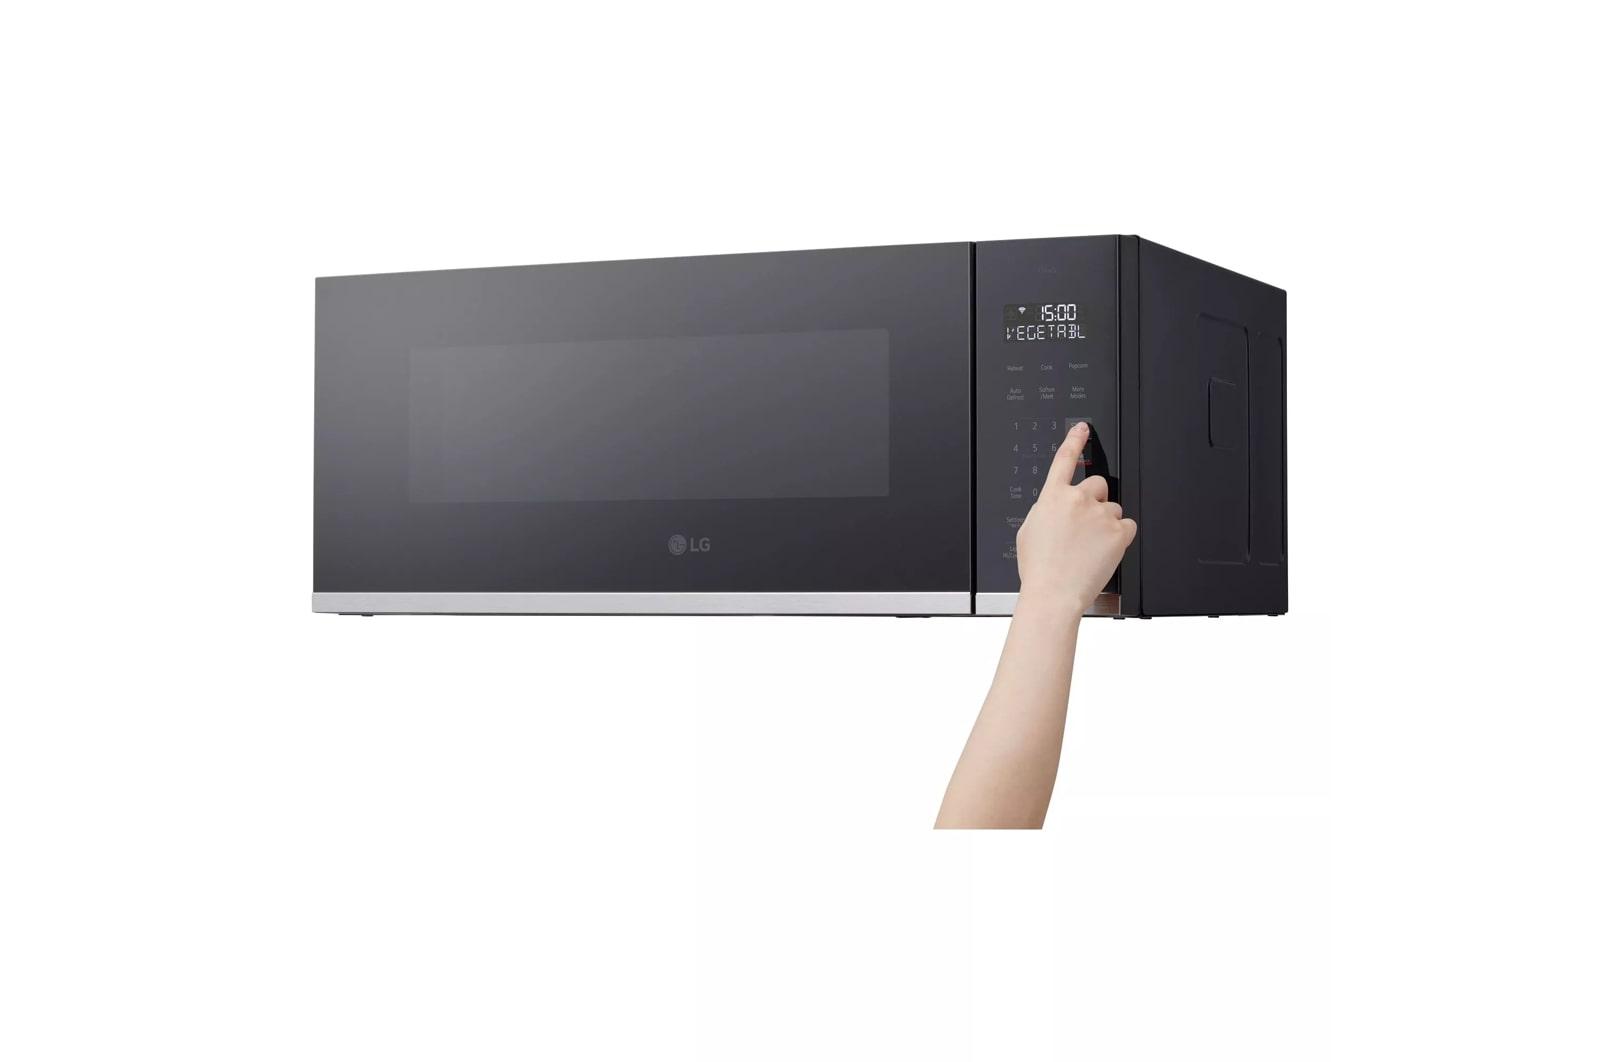 Lg 1.3 cu. ft. Smart Low Profile Over-the-Range Microwave Oven